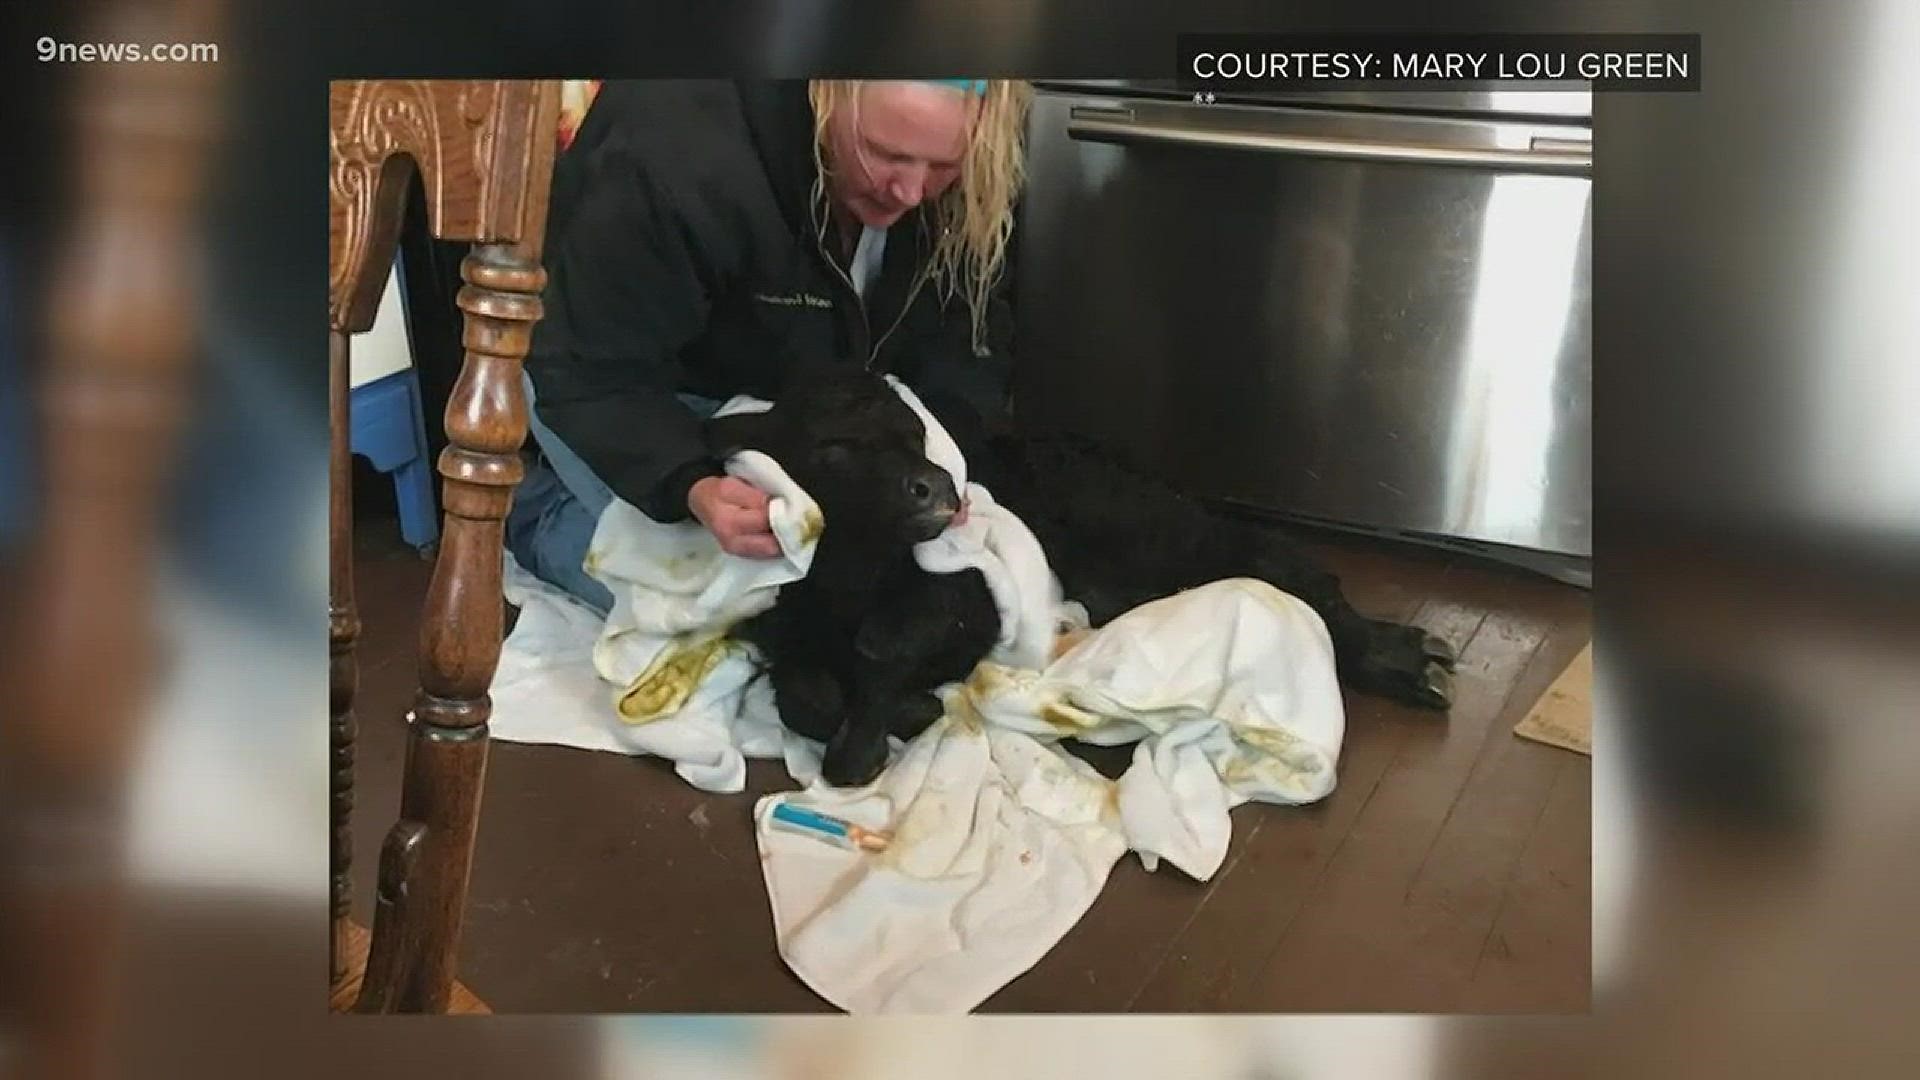 The ranch owners say they brought the calf into their kitchen to make sure it survived Wednesday's blizzard. The calf was freezing at the time, but has improved since then.